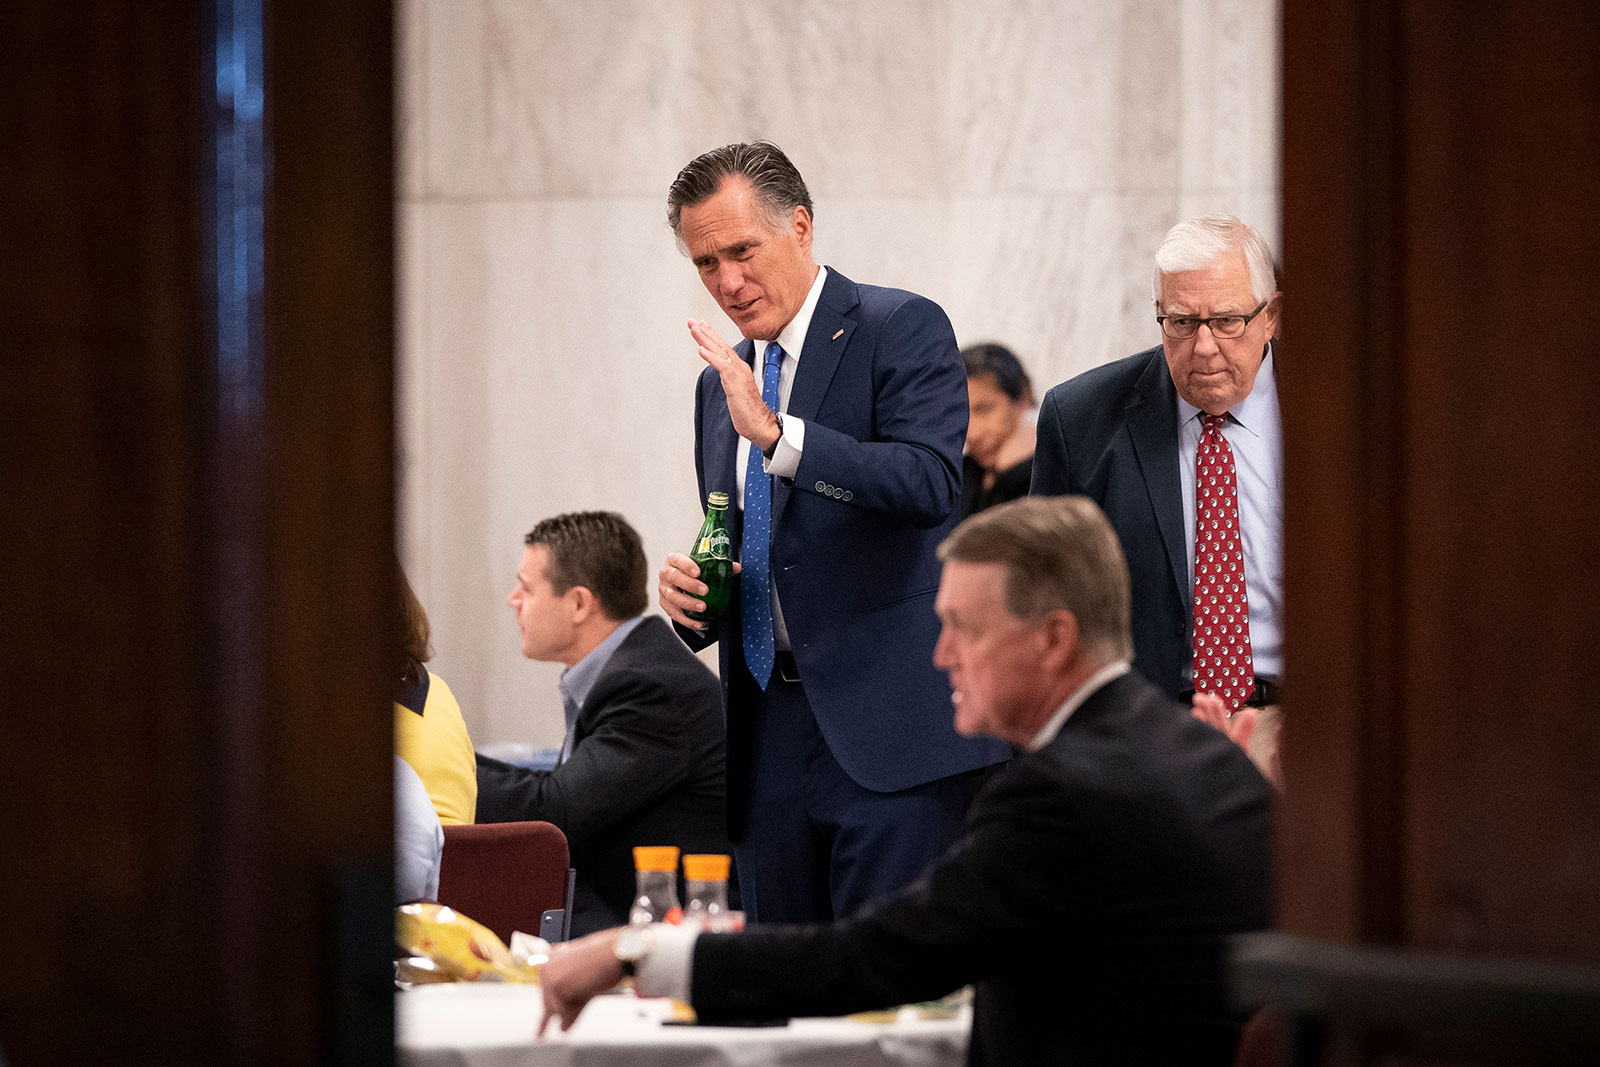 Sen. Mitt Romney attends a Senate GOP lunch meeting in Washington, DC, on Friday, March 20. Sen. Rand Paul, who tested positive for the coronavirus on Sunday, also attended the meeting.